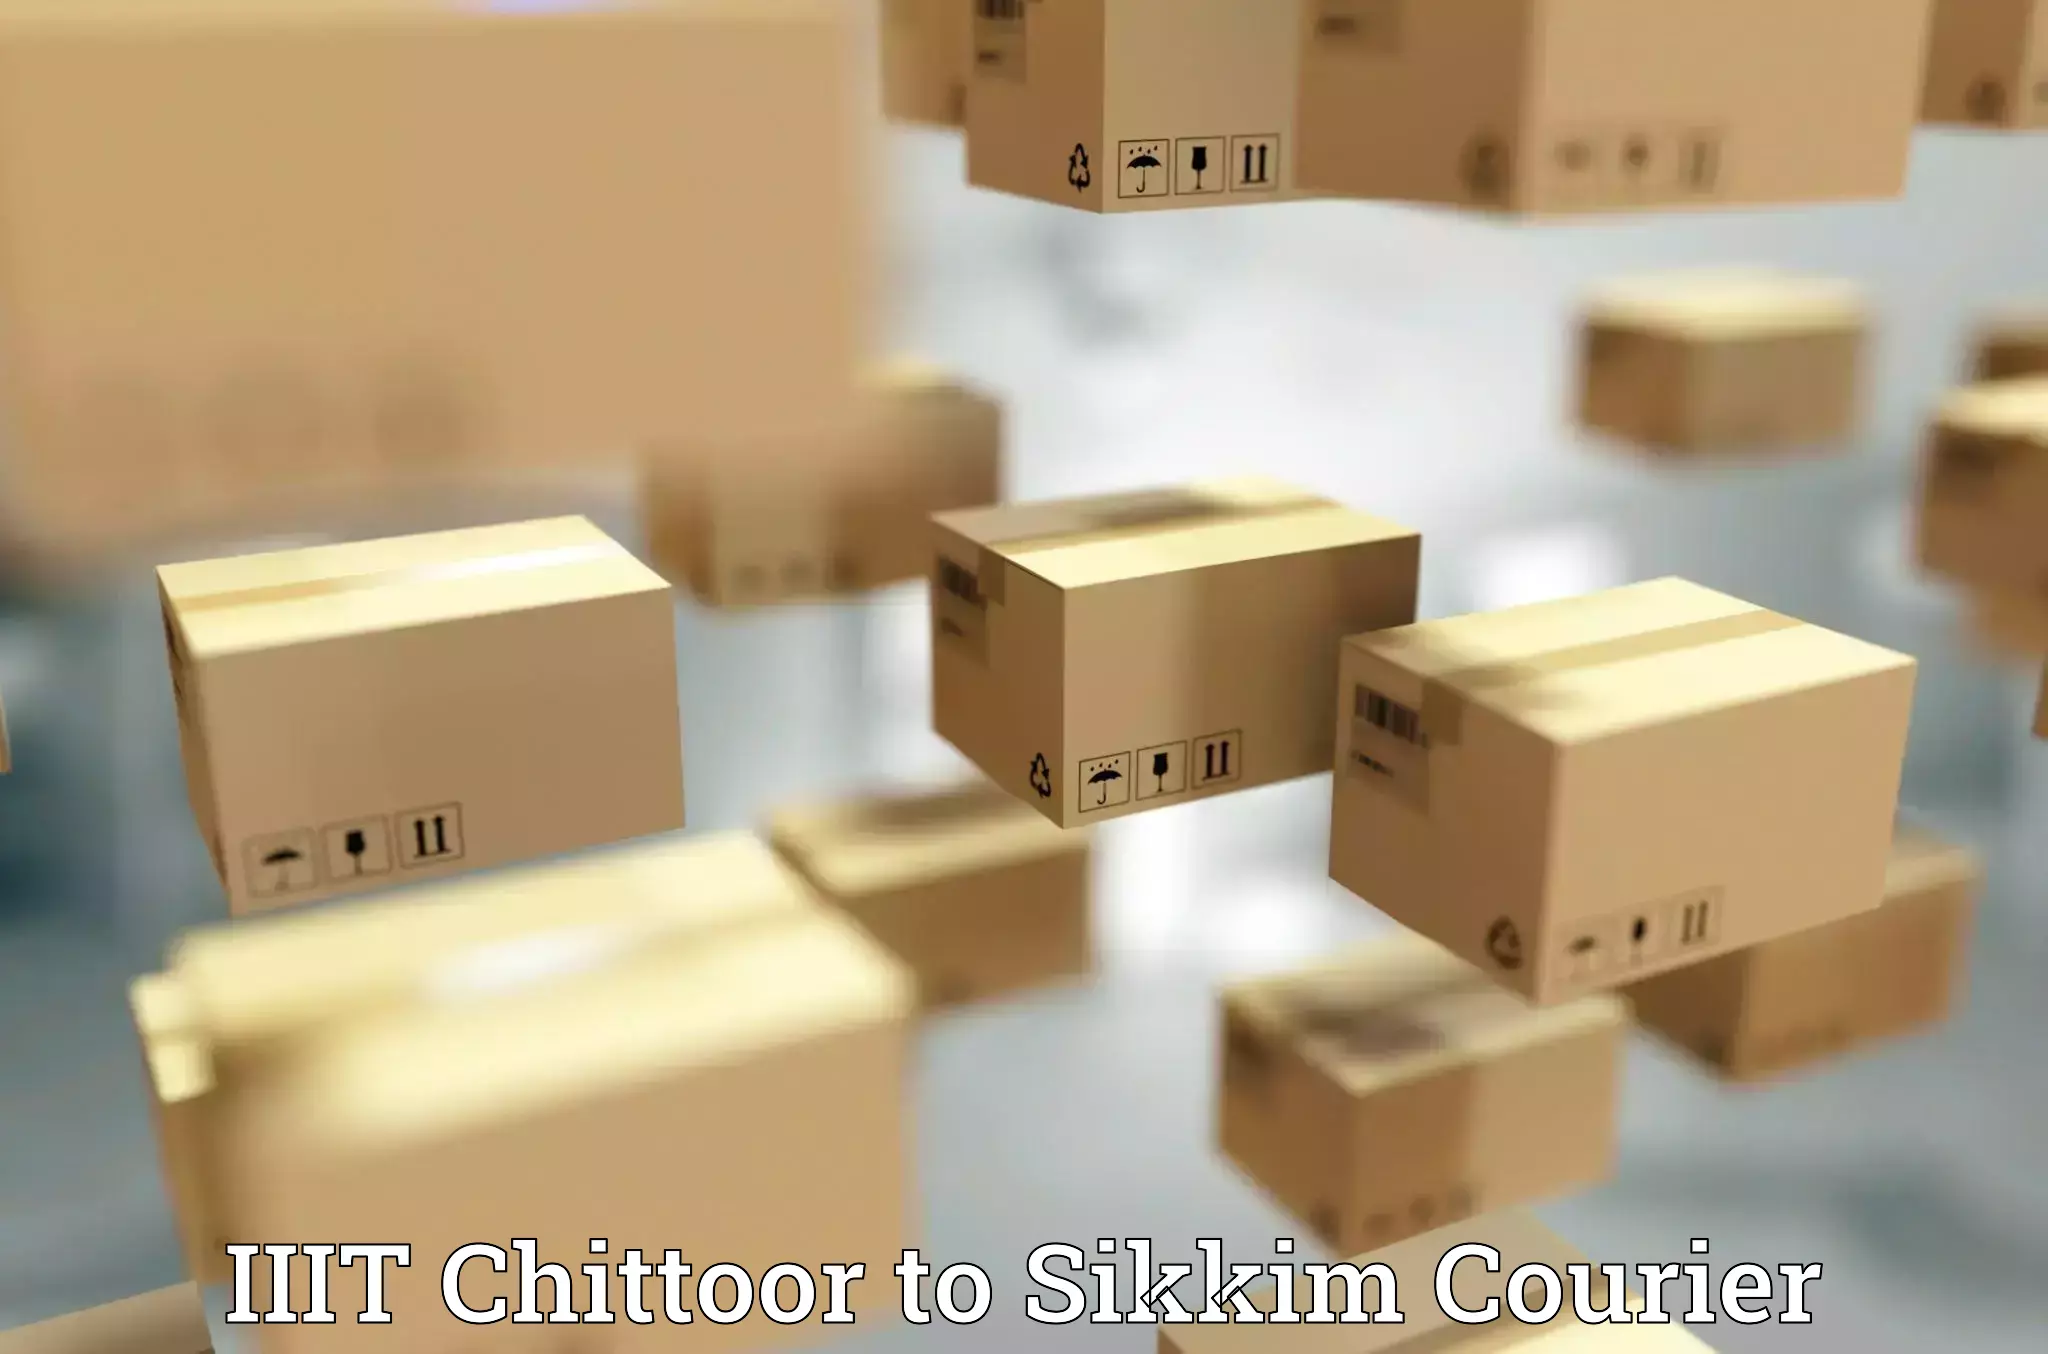 Delivery service partnership IIIT Chittoor to Sikkim